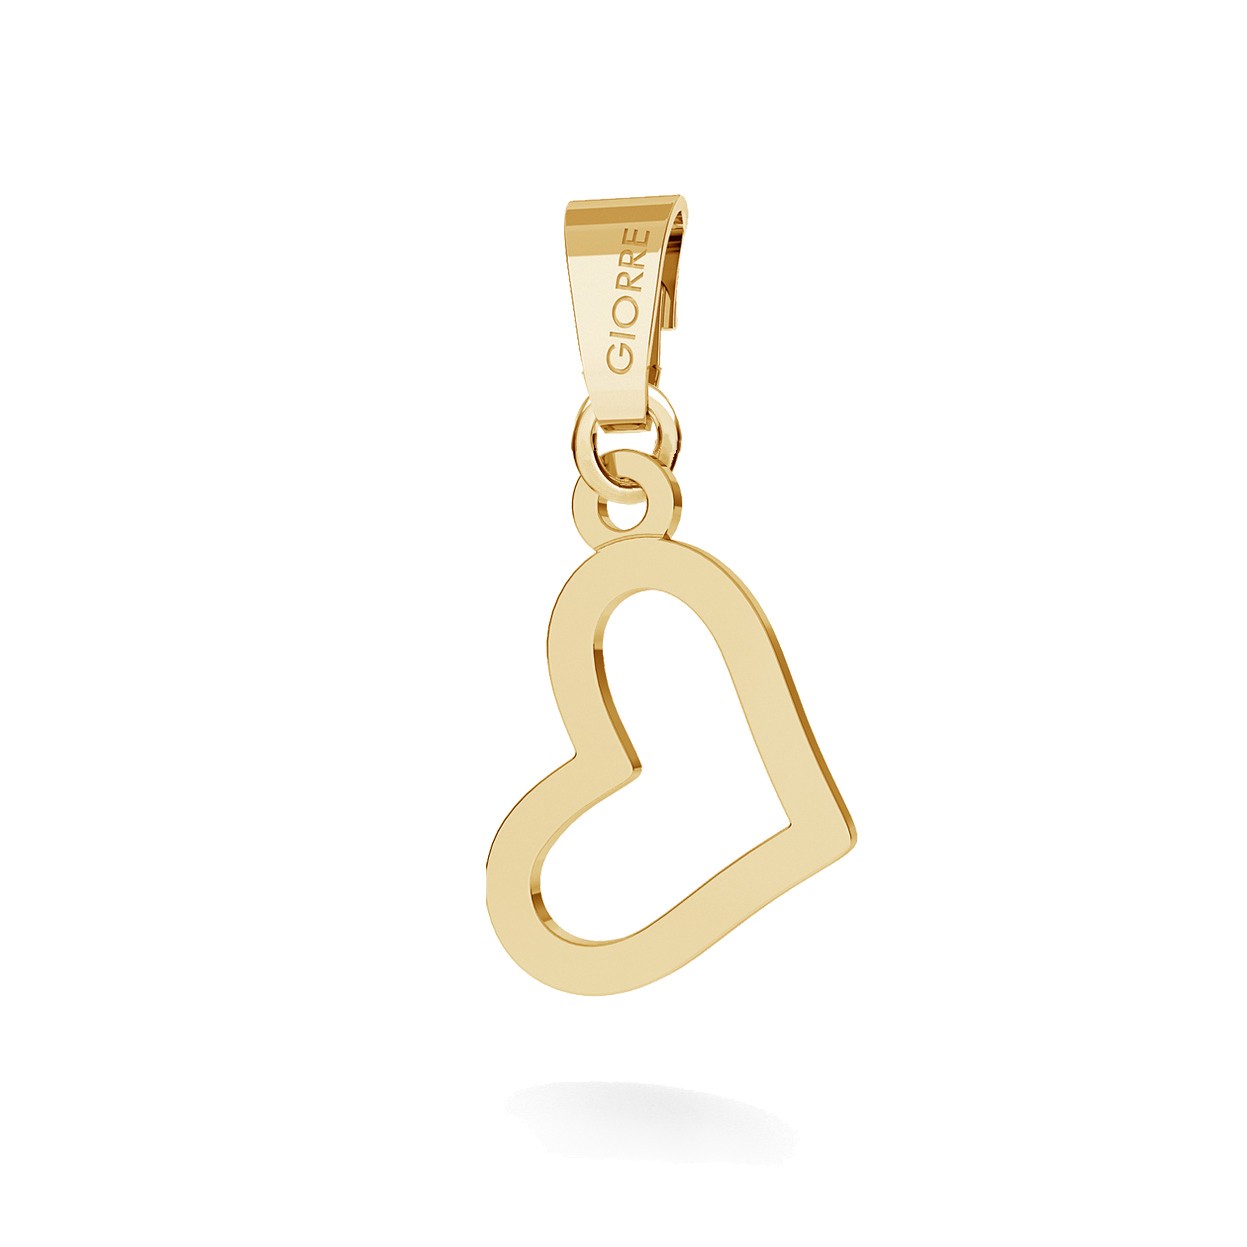 CHARM 114, SIMPLE HEART, STERLING SILVER (925) RHODIUM OR GOLD PLATED